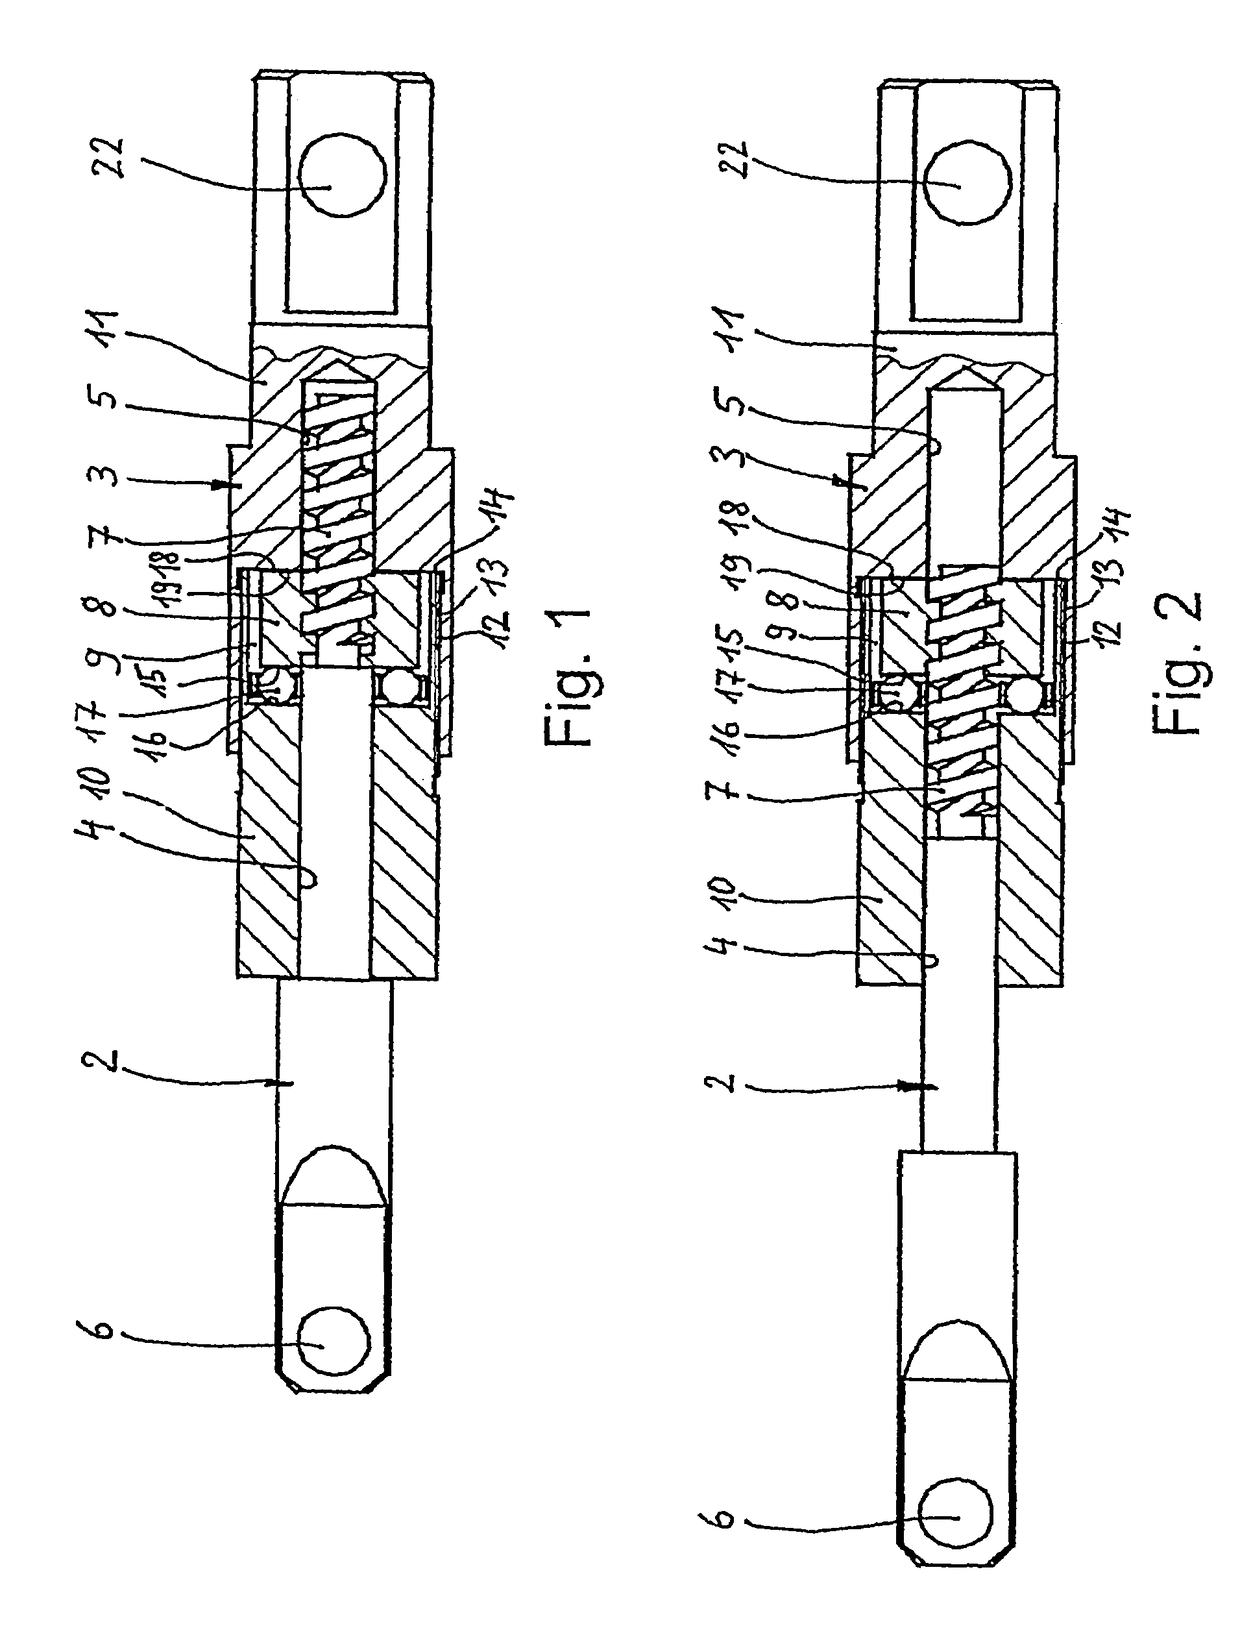 Longitudinally adjustable intermediate piece with a unidirectionally acting displacement blocking mechanism